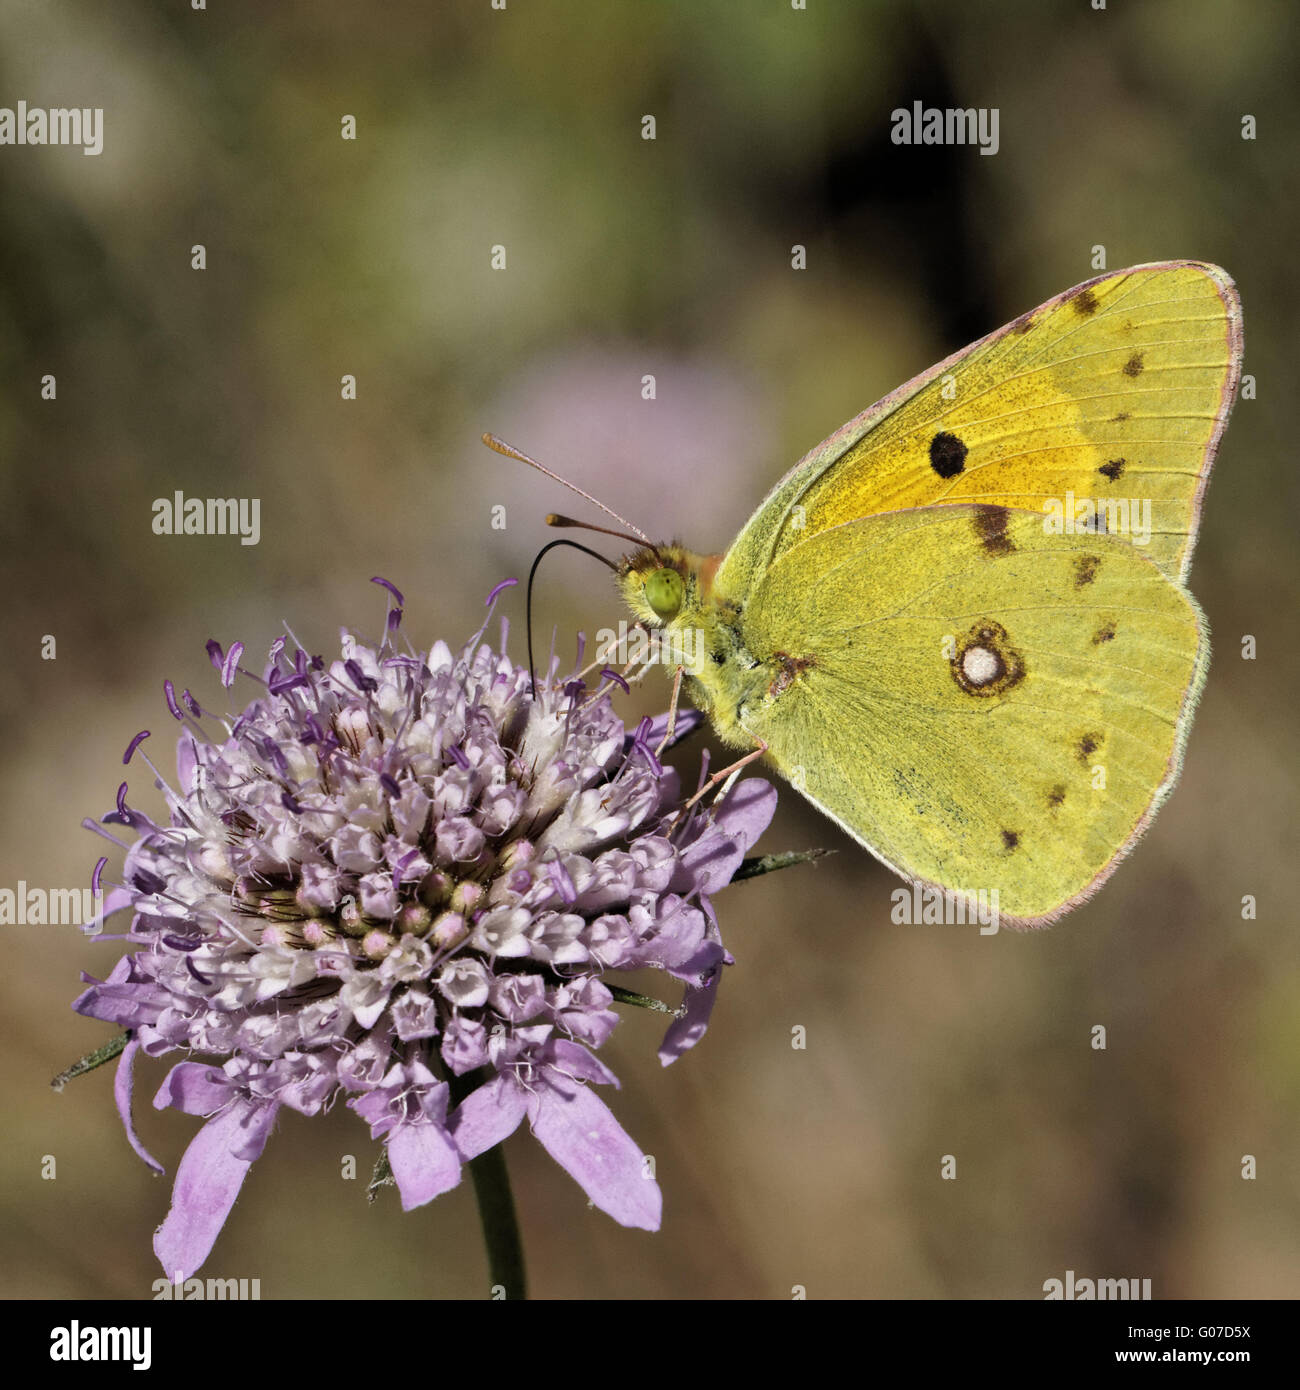 Colias crocea, Dark Clouded Yellow on Scabious Stock Photo